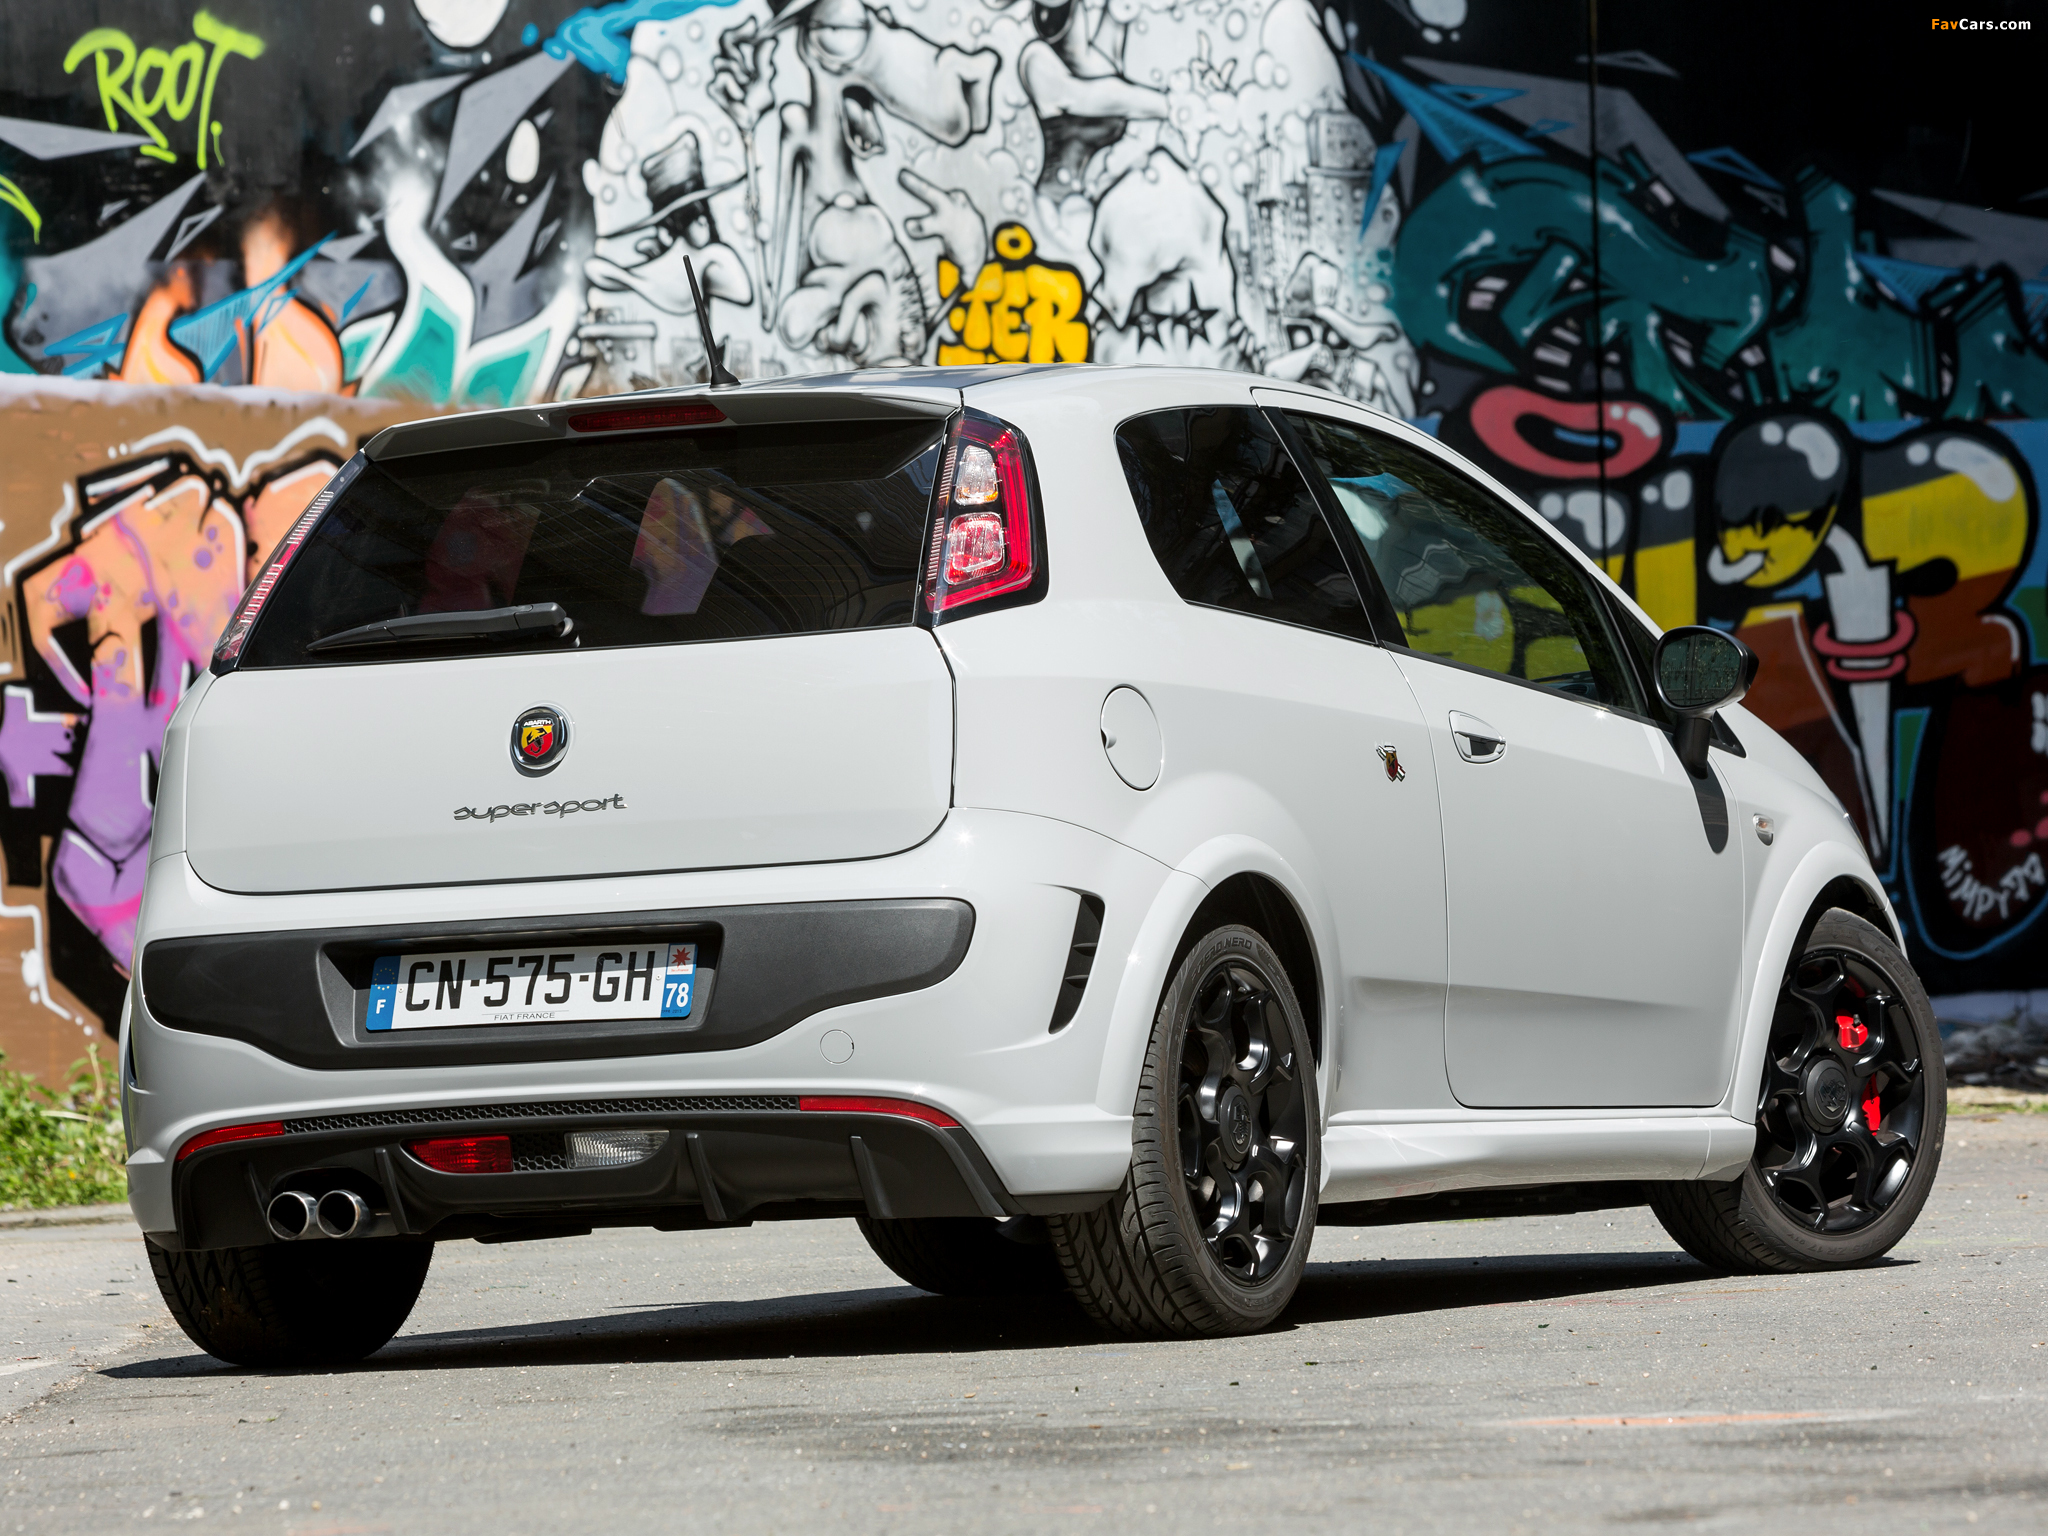 Images of Abarth Punto SuperSport 199 (2012) (2048 x 1536)